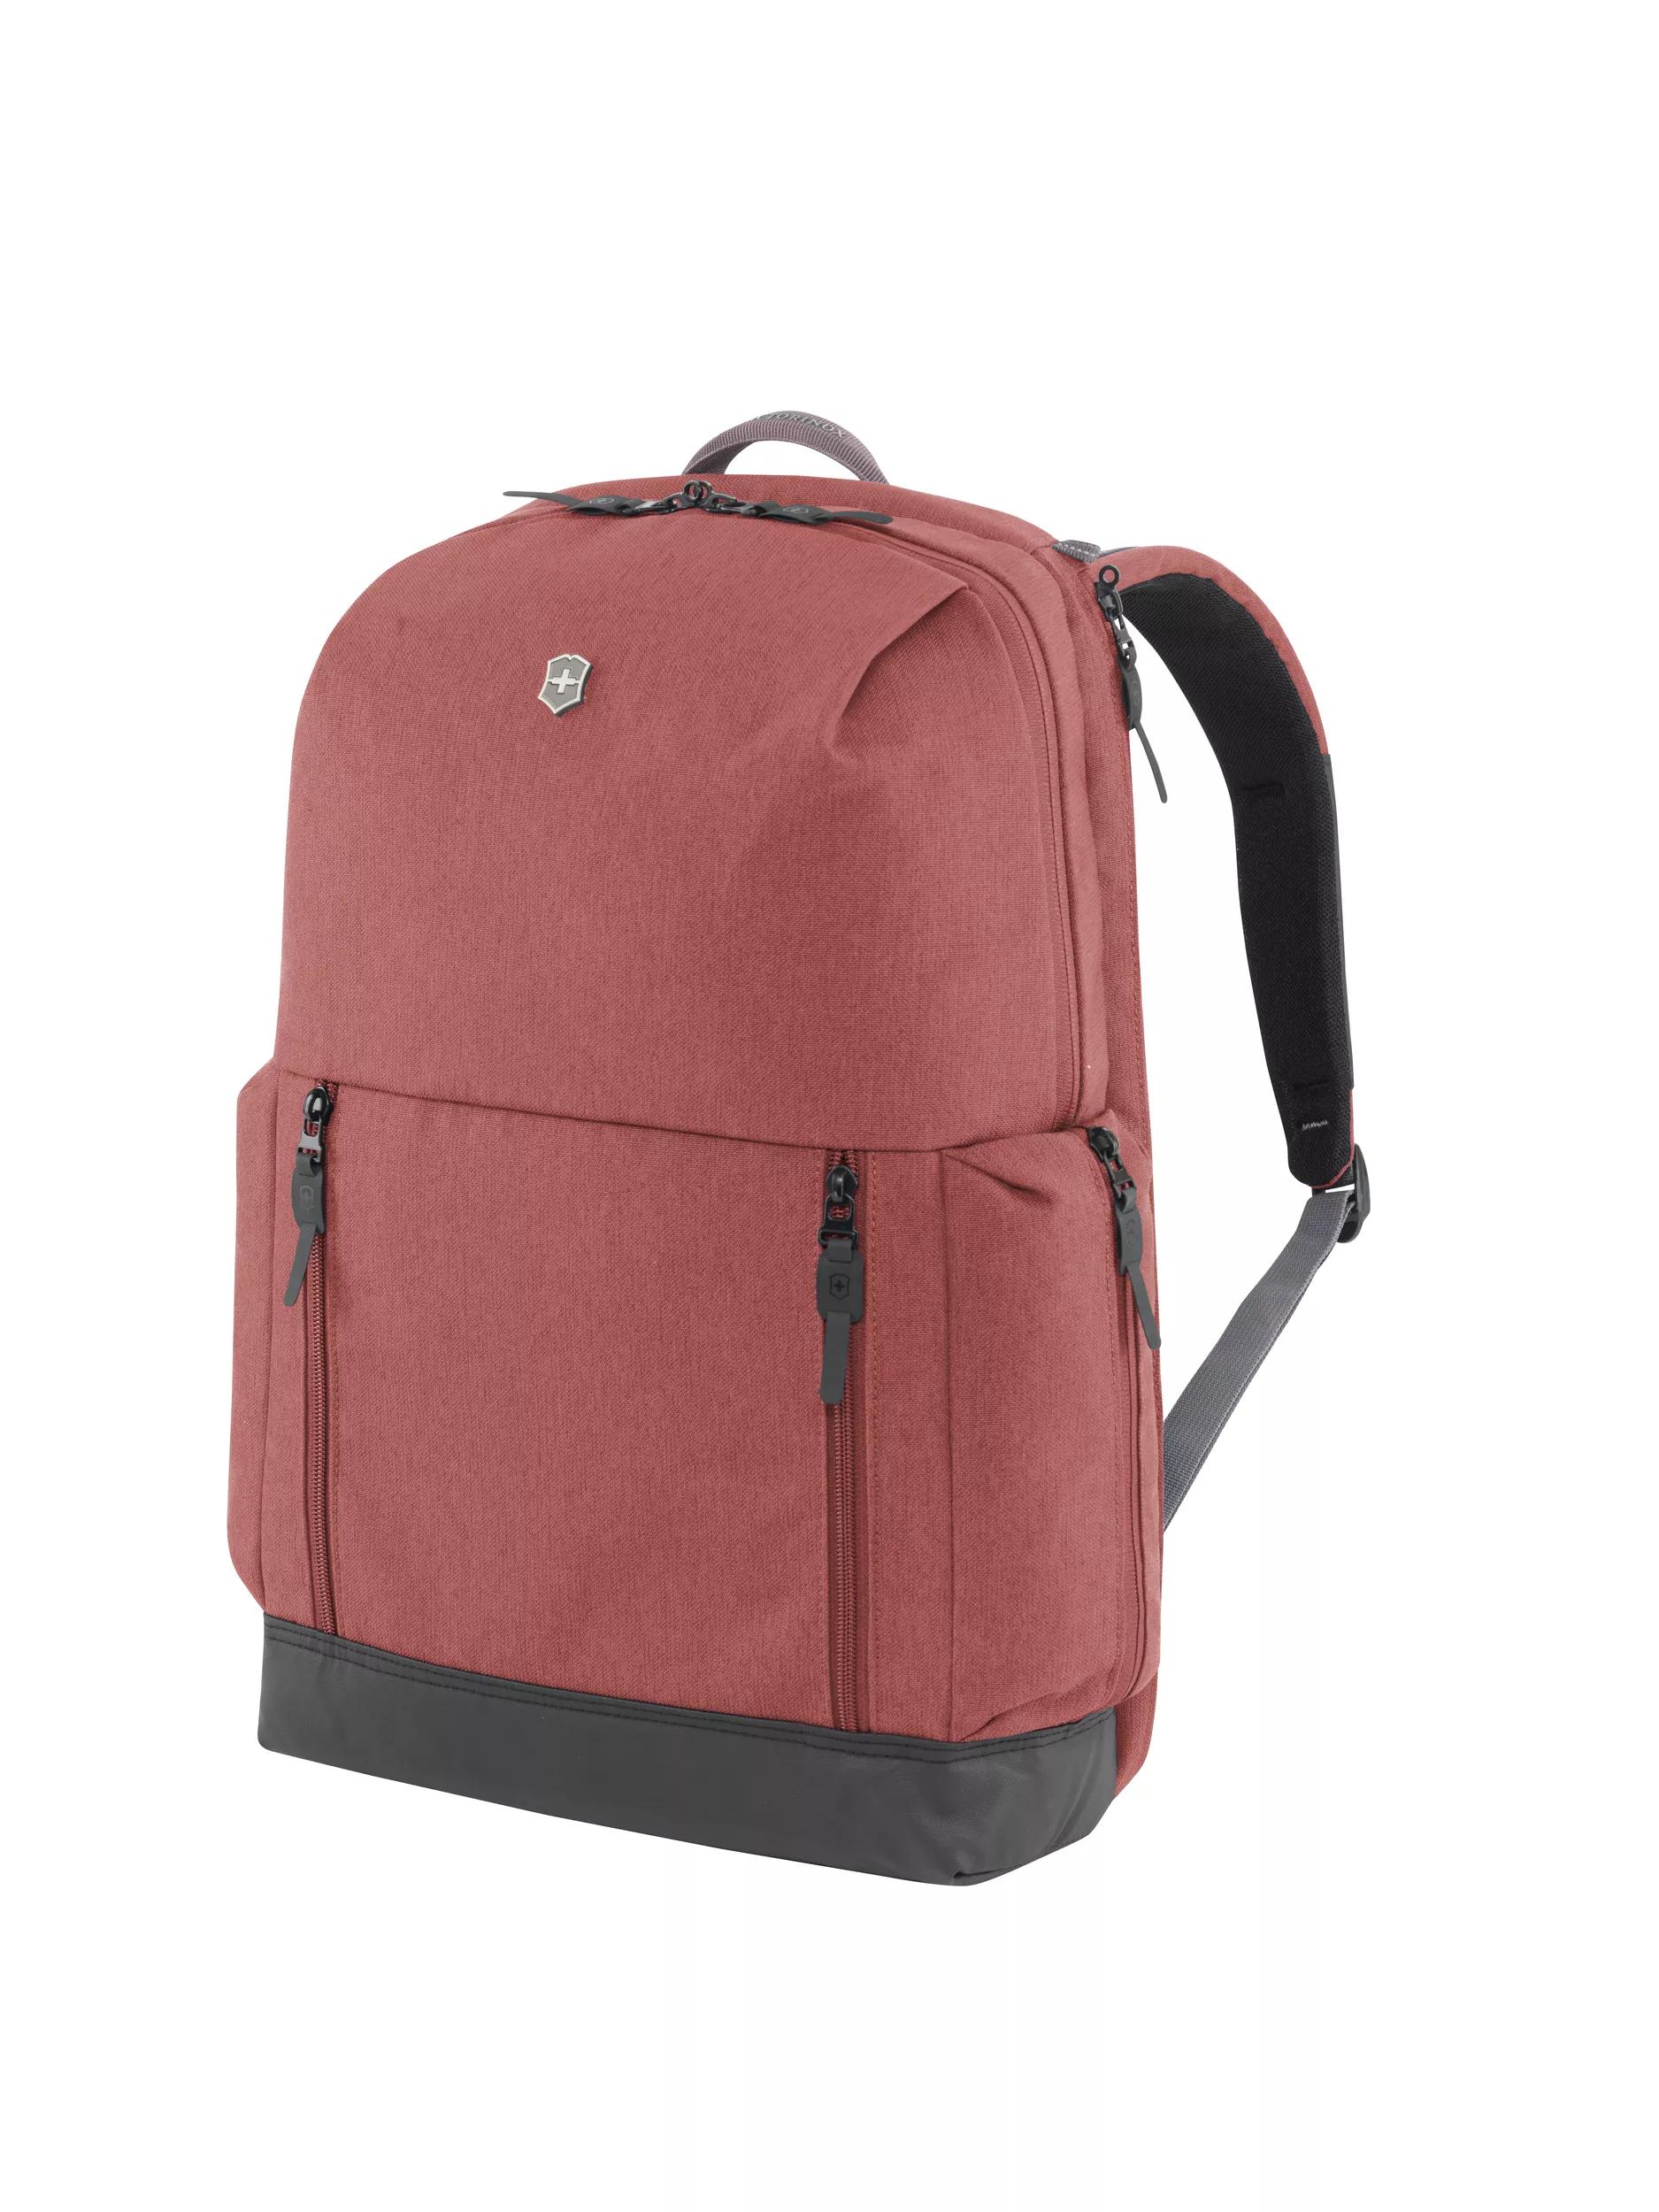 Altmont Classic Deluxe Laptop Backpack